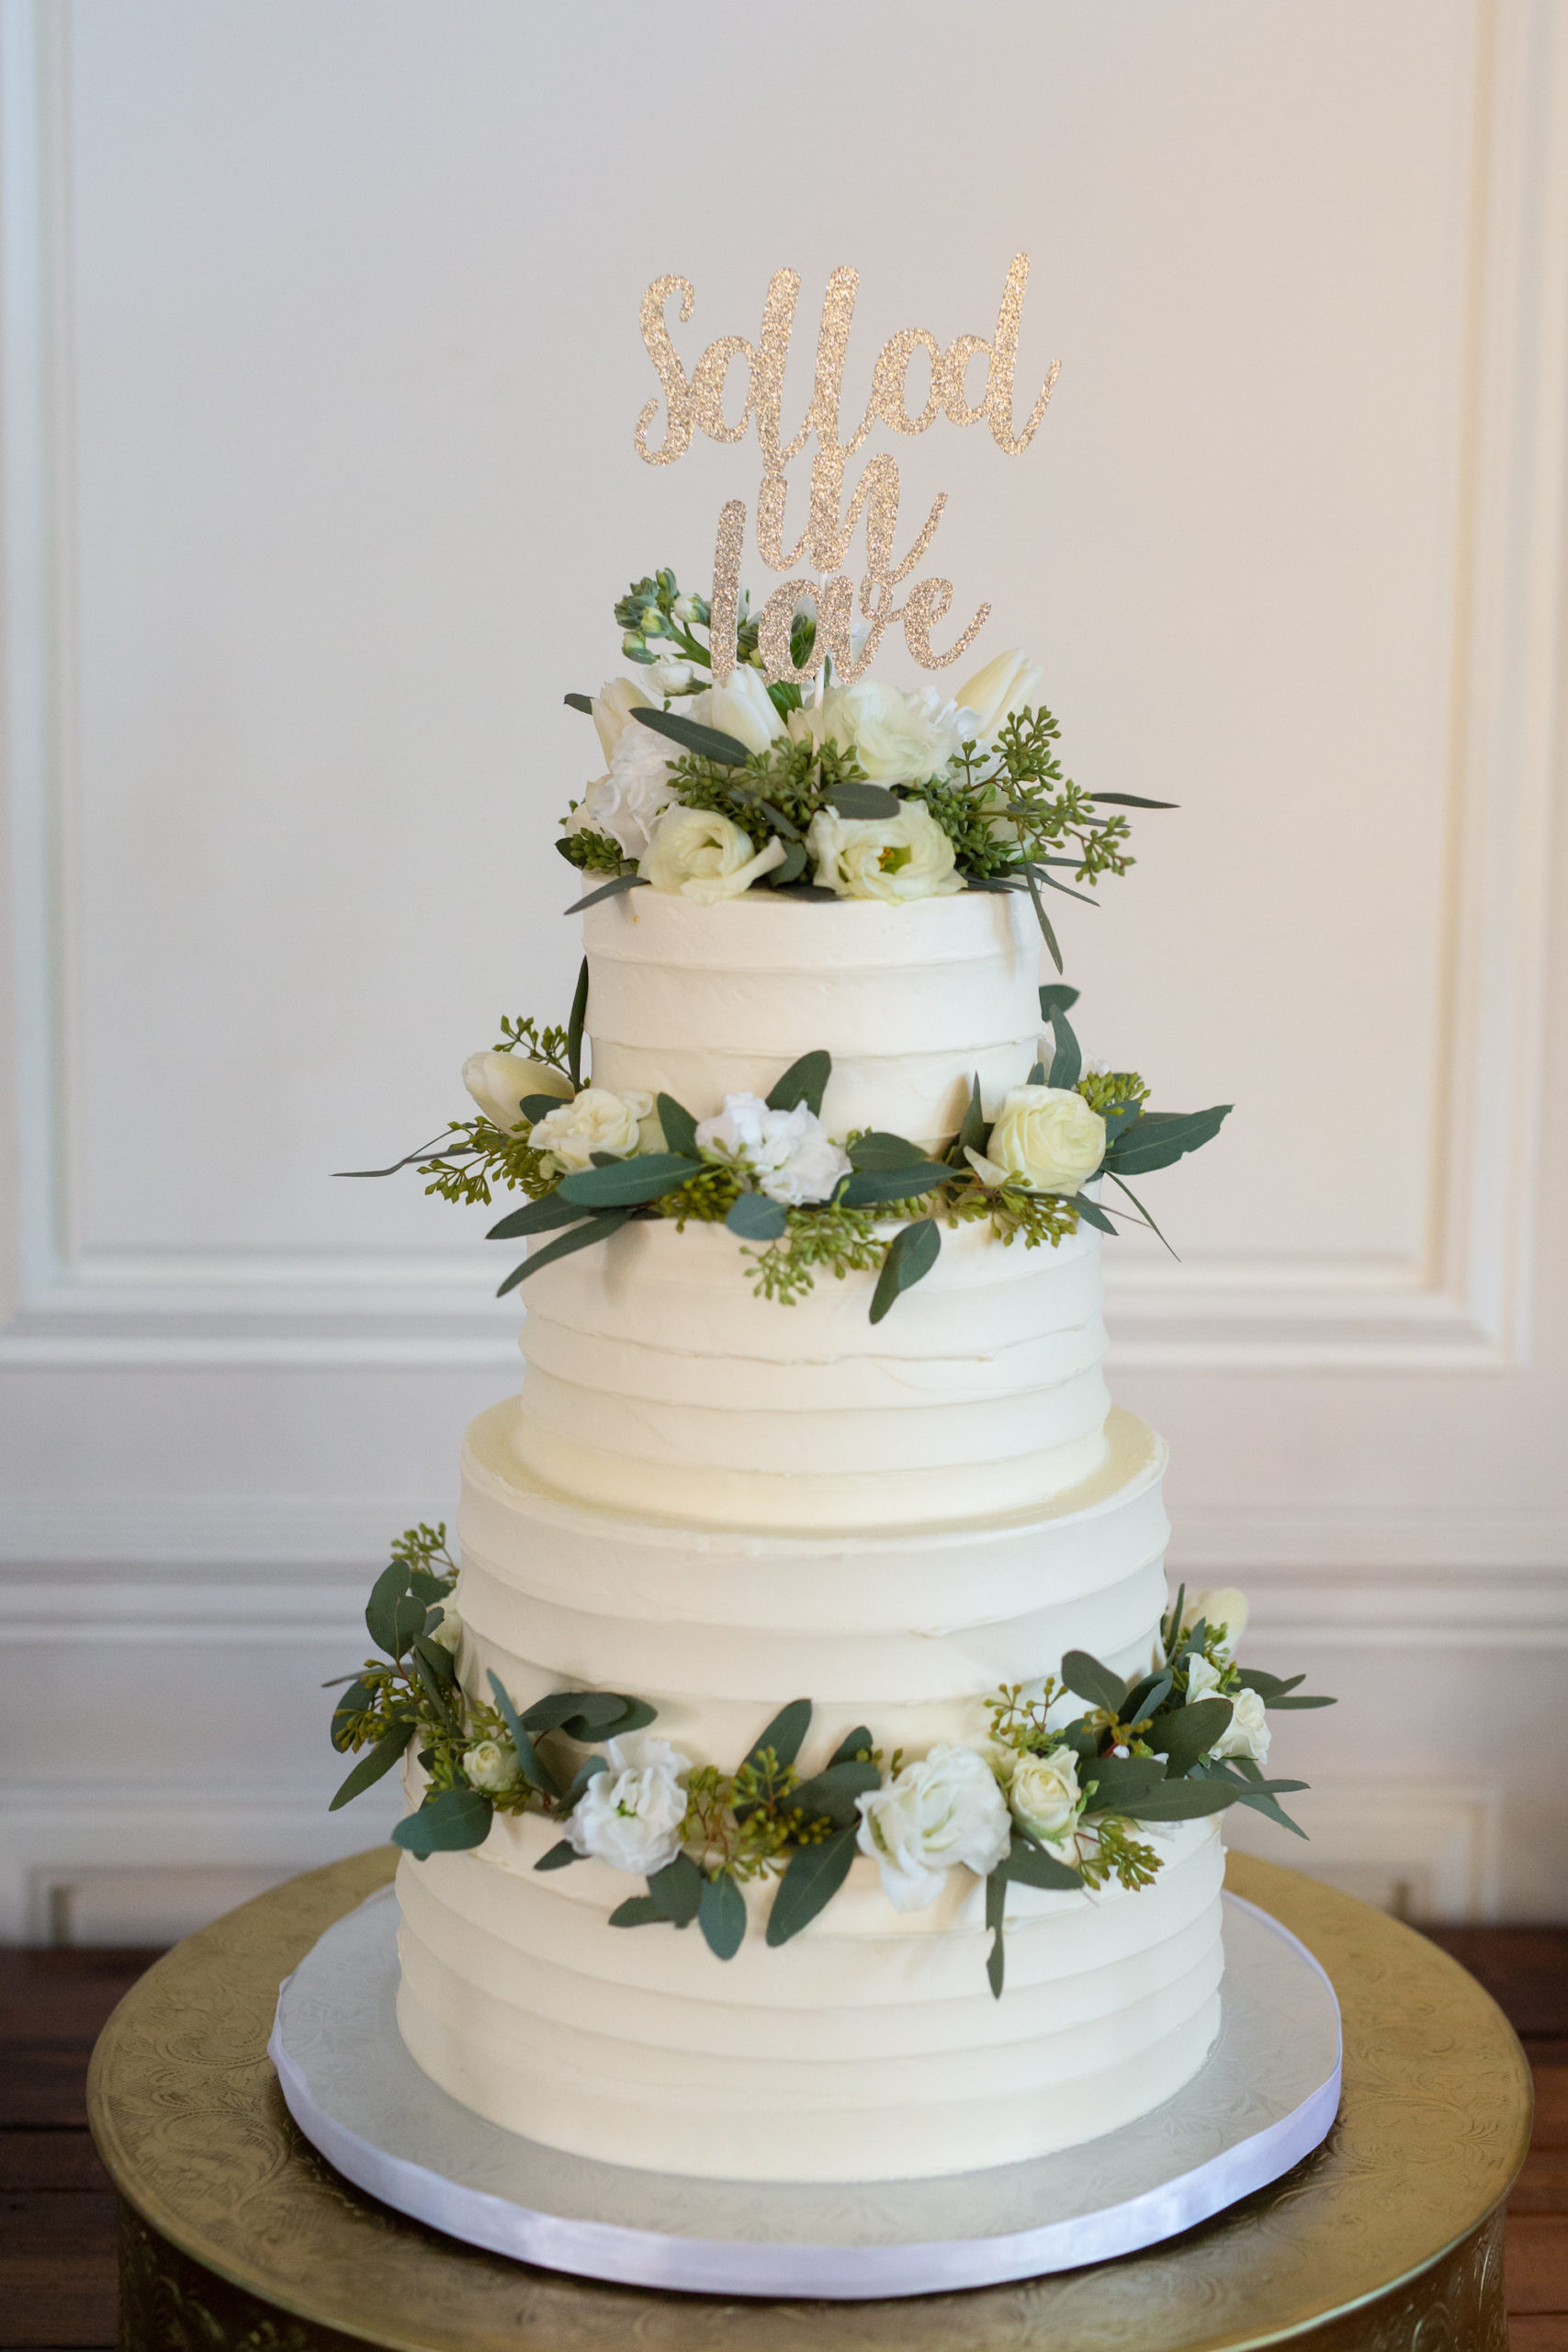 Classic Three Tier White Wedding Cake Decorated with Ivory Roses and Green Leaves with Custom Gold Cake Topper | Wedding Cake Historic Hotel The Don CeSar